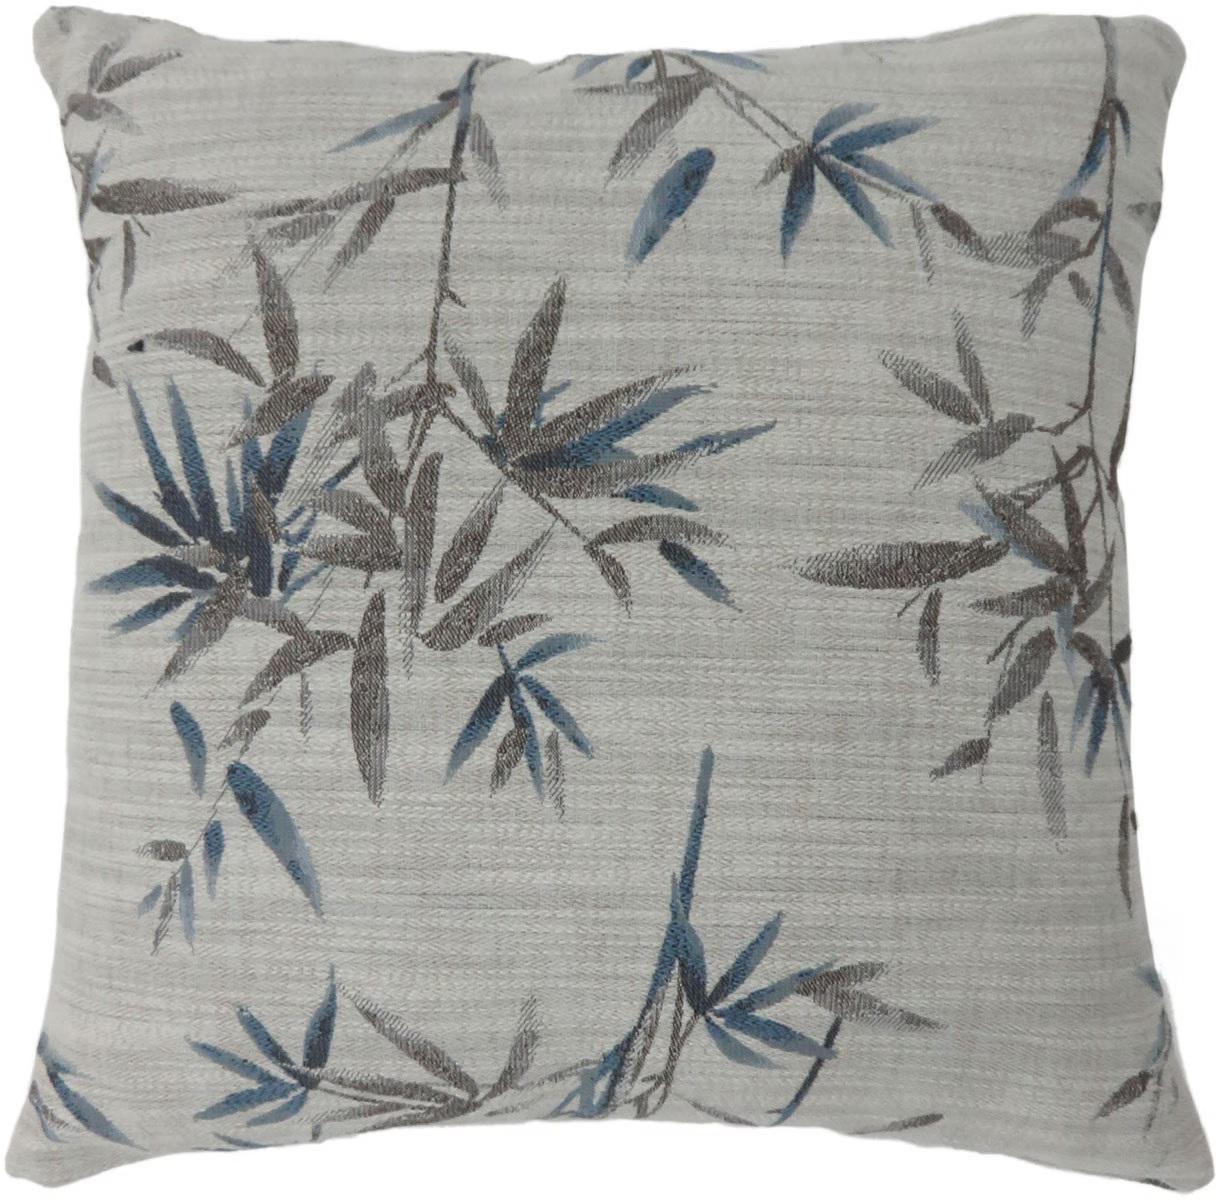 Transitional Throw Pillow PL6031BL-S Anika PL6031BL-S in Blue 